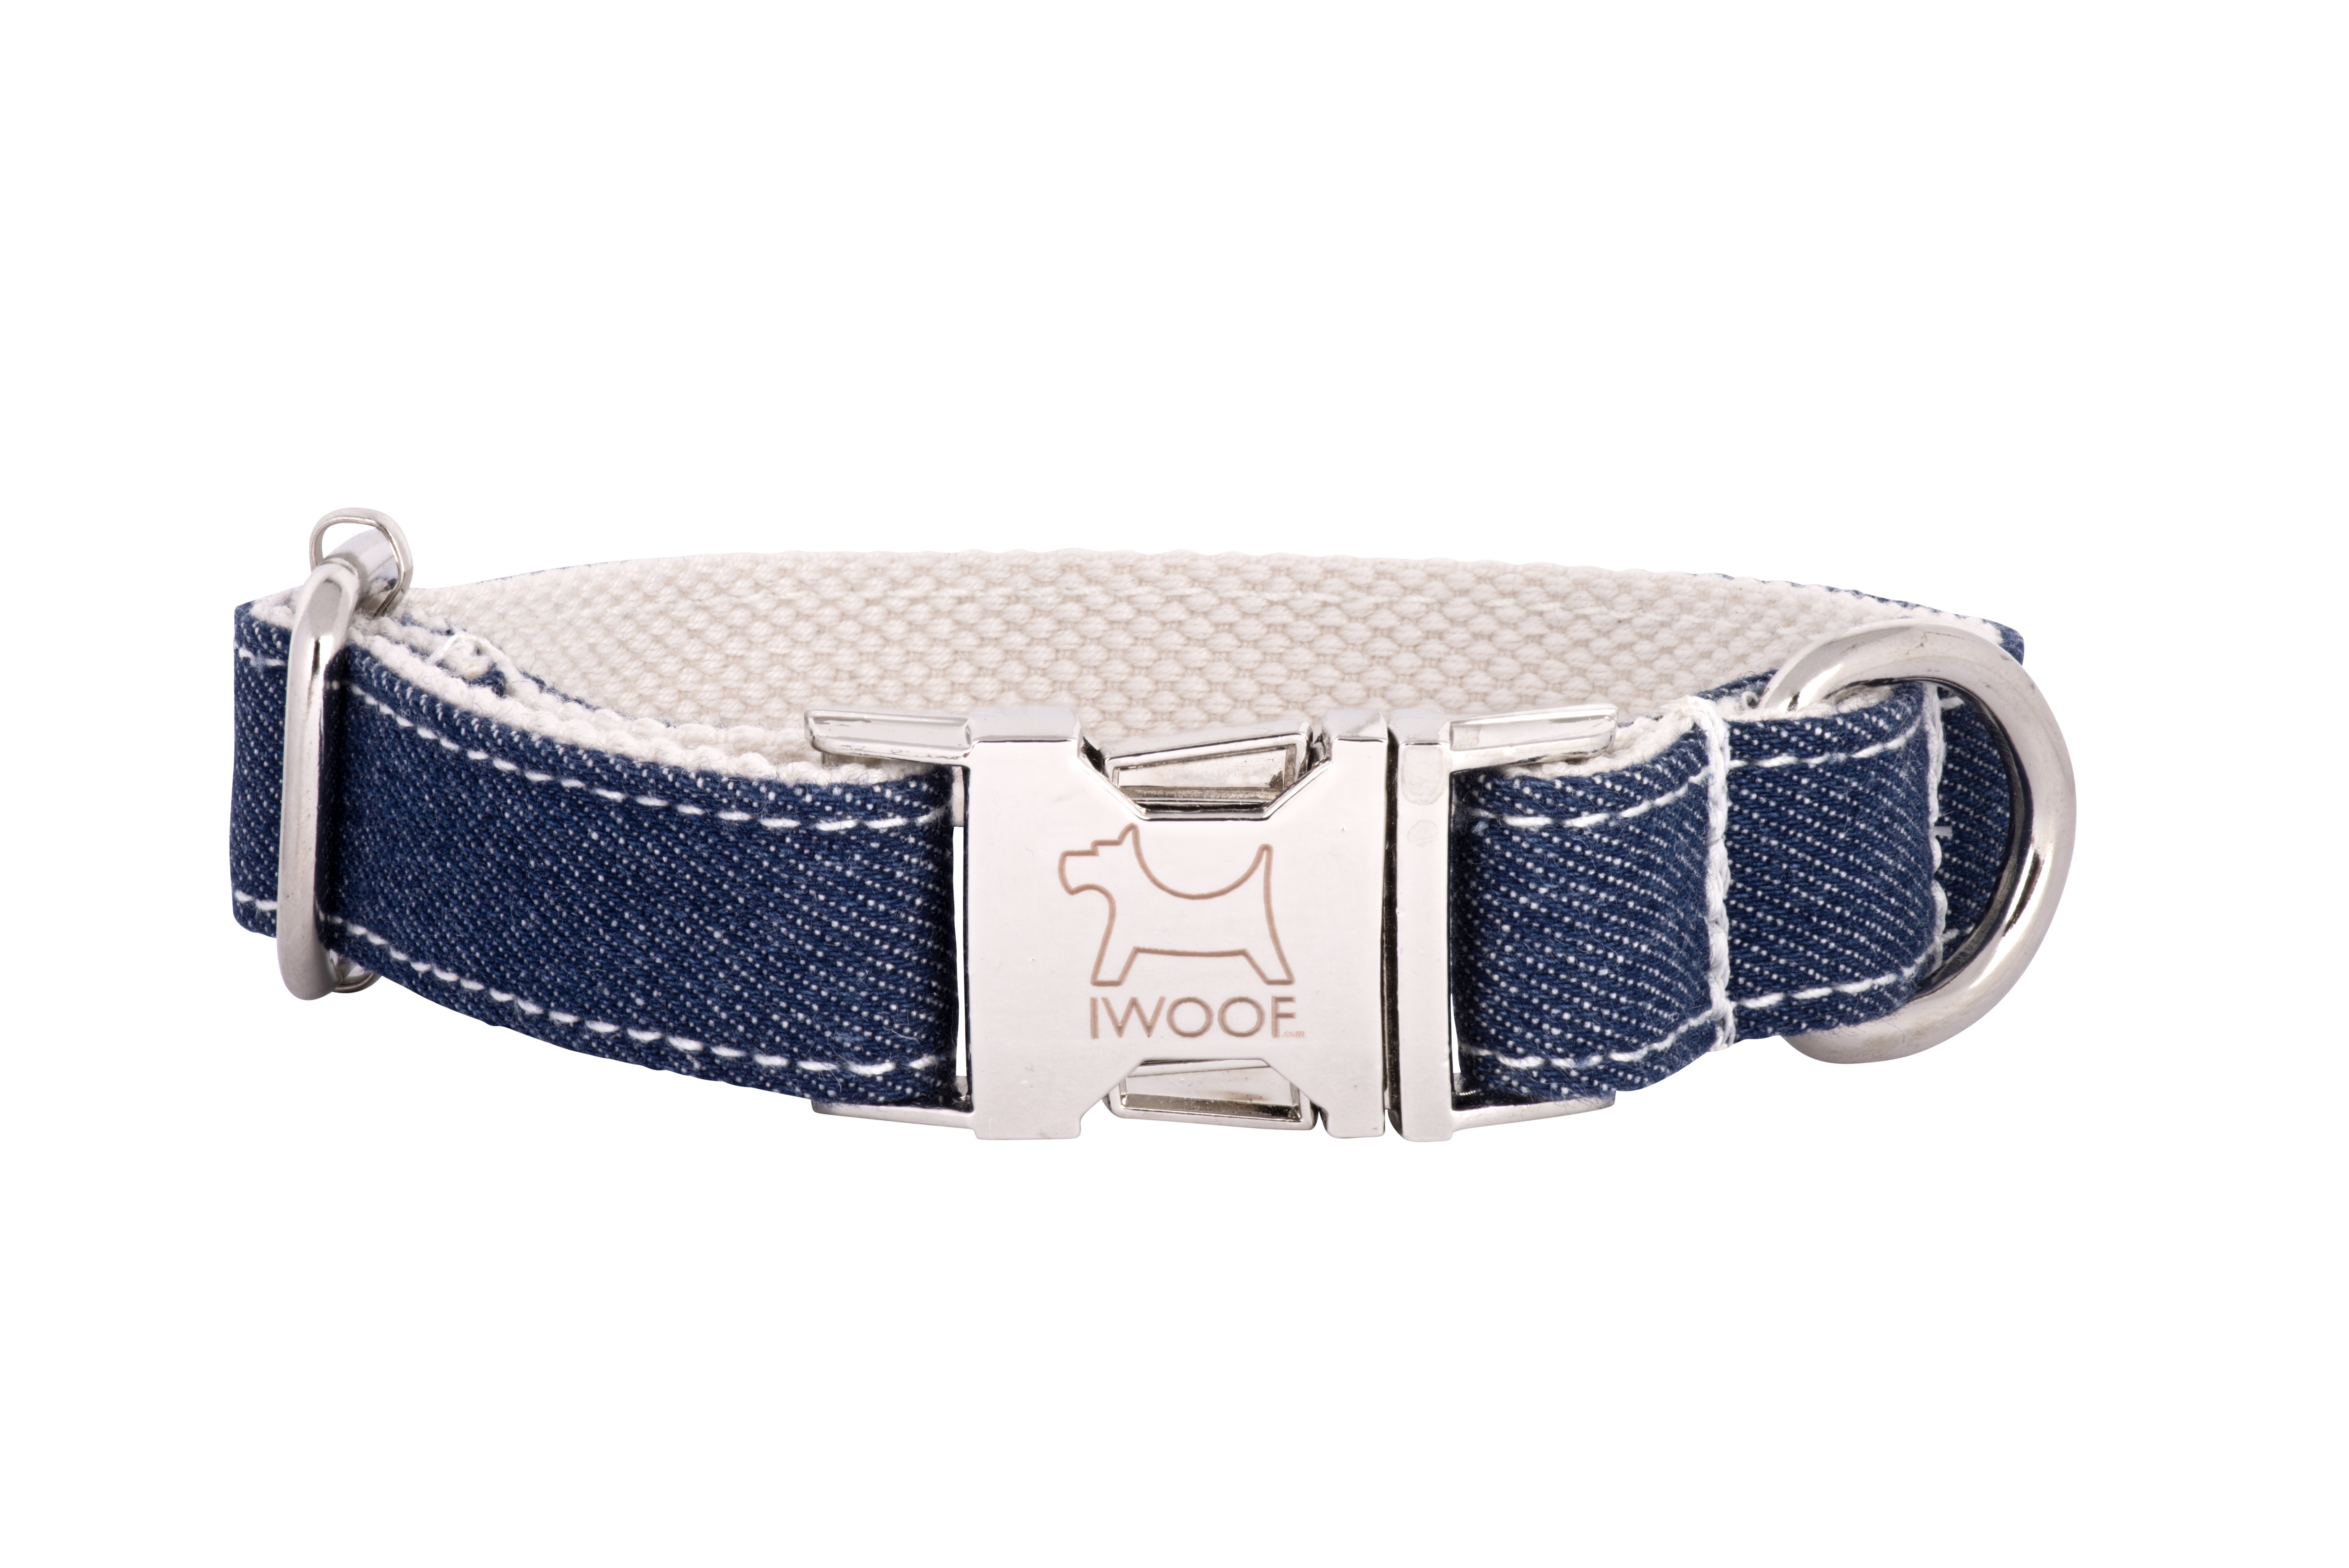 WHITE Jean designer dog collar and dog lead by IWOOF